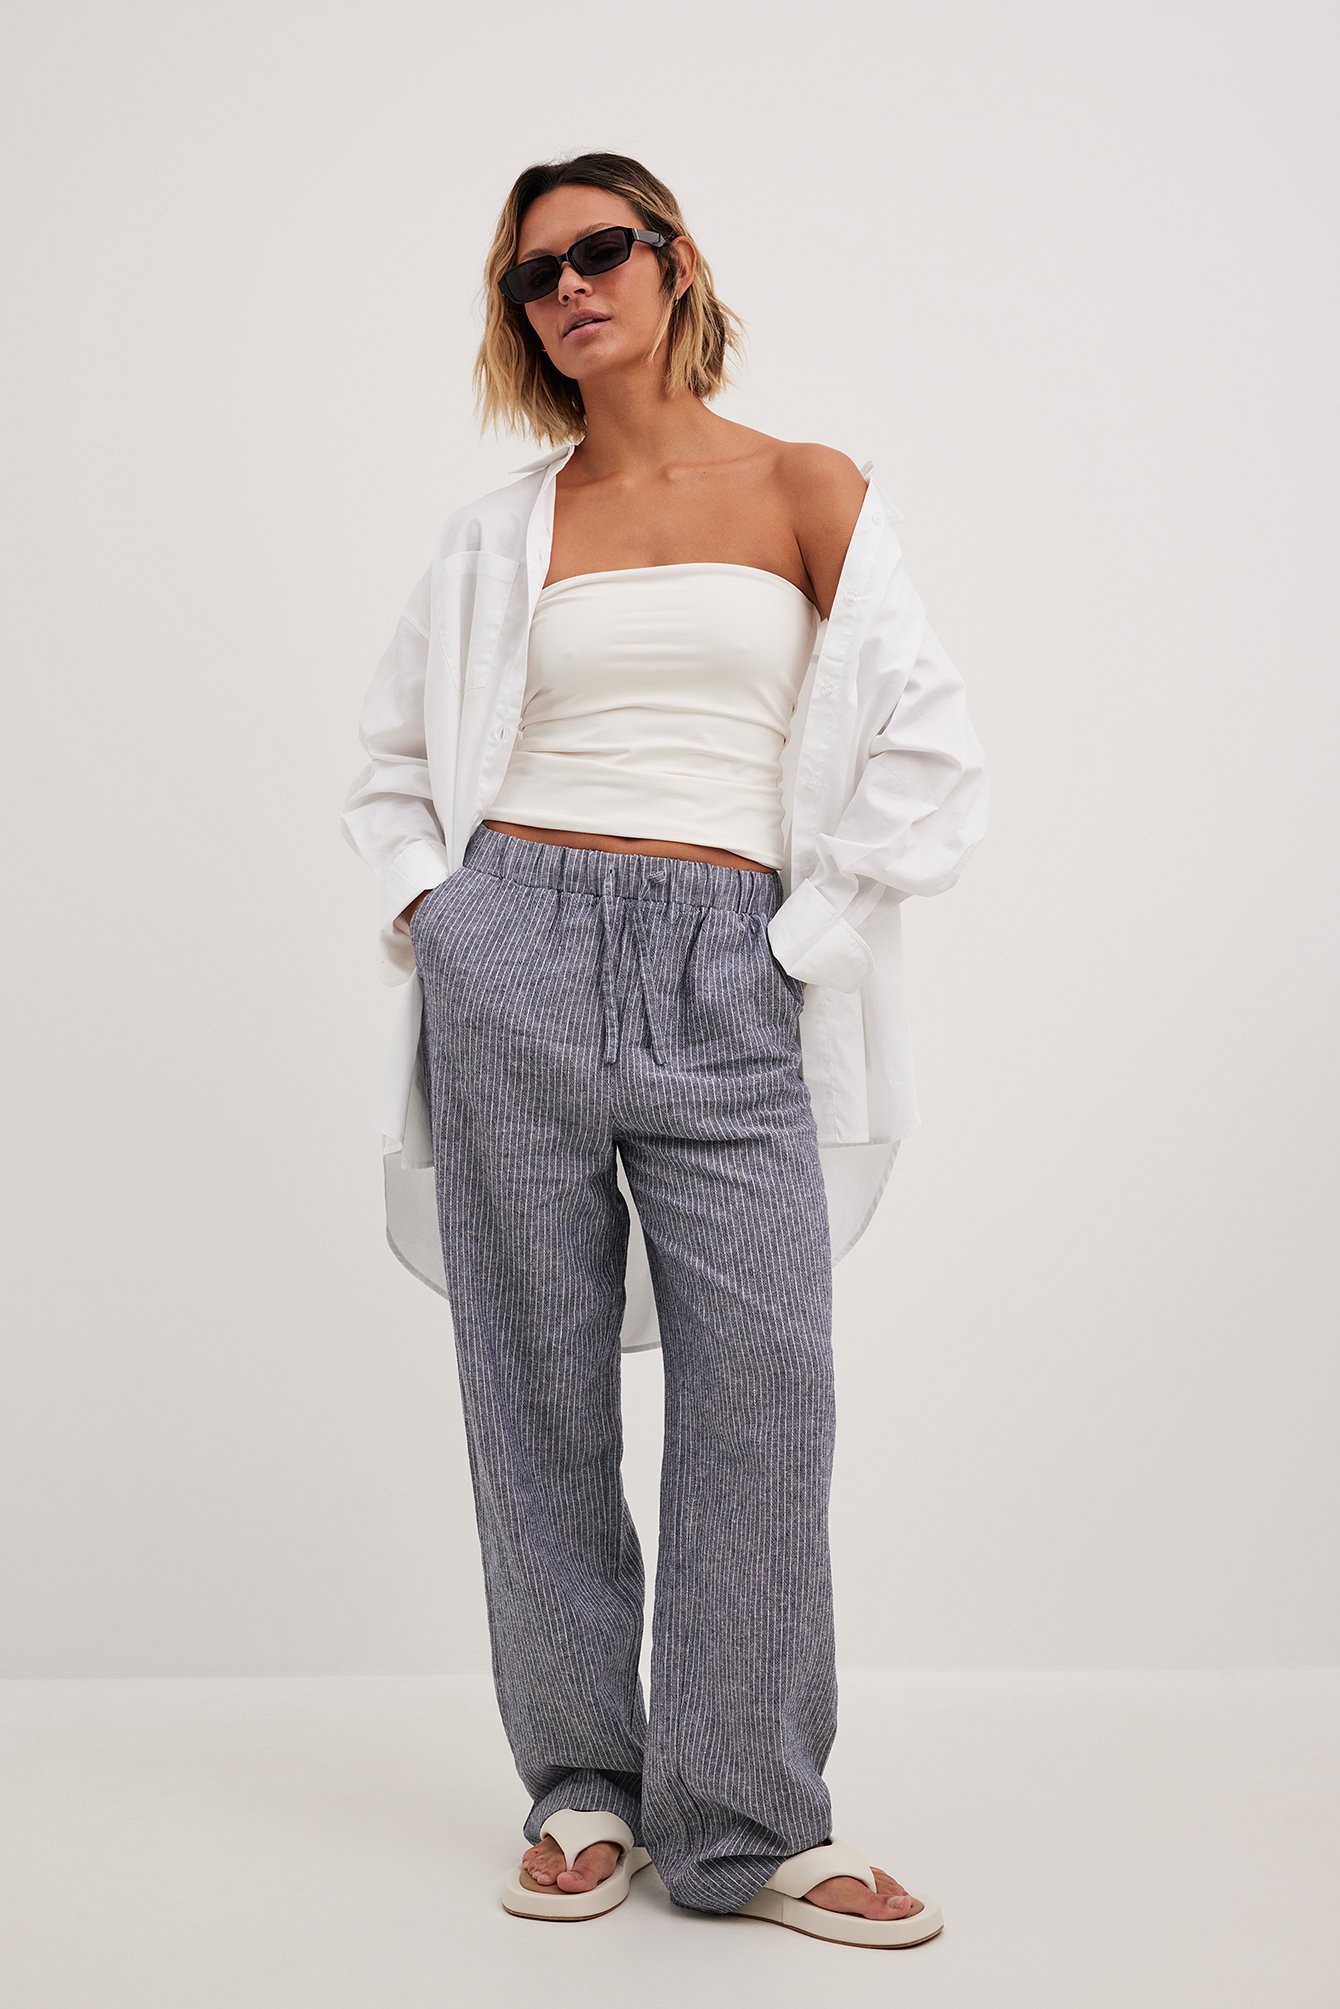 Linen Pants Women Summer Casual Printing Stripe Pattern Low Rise Pants for  Women Fashion Fitted Daily Linen And Cotton Lightweight Party Vacation